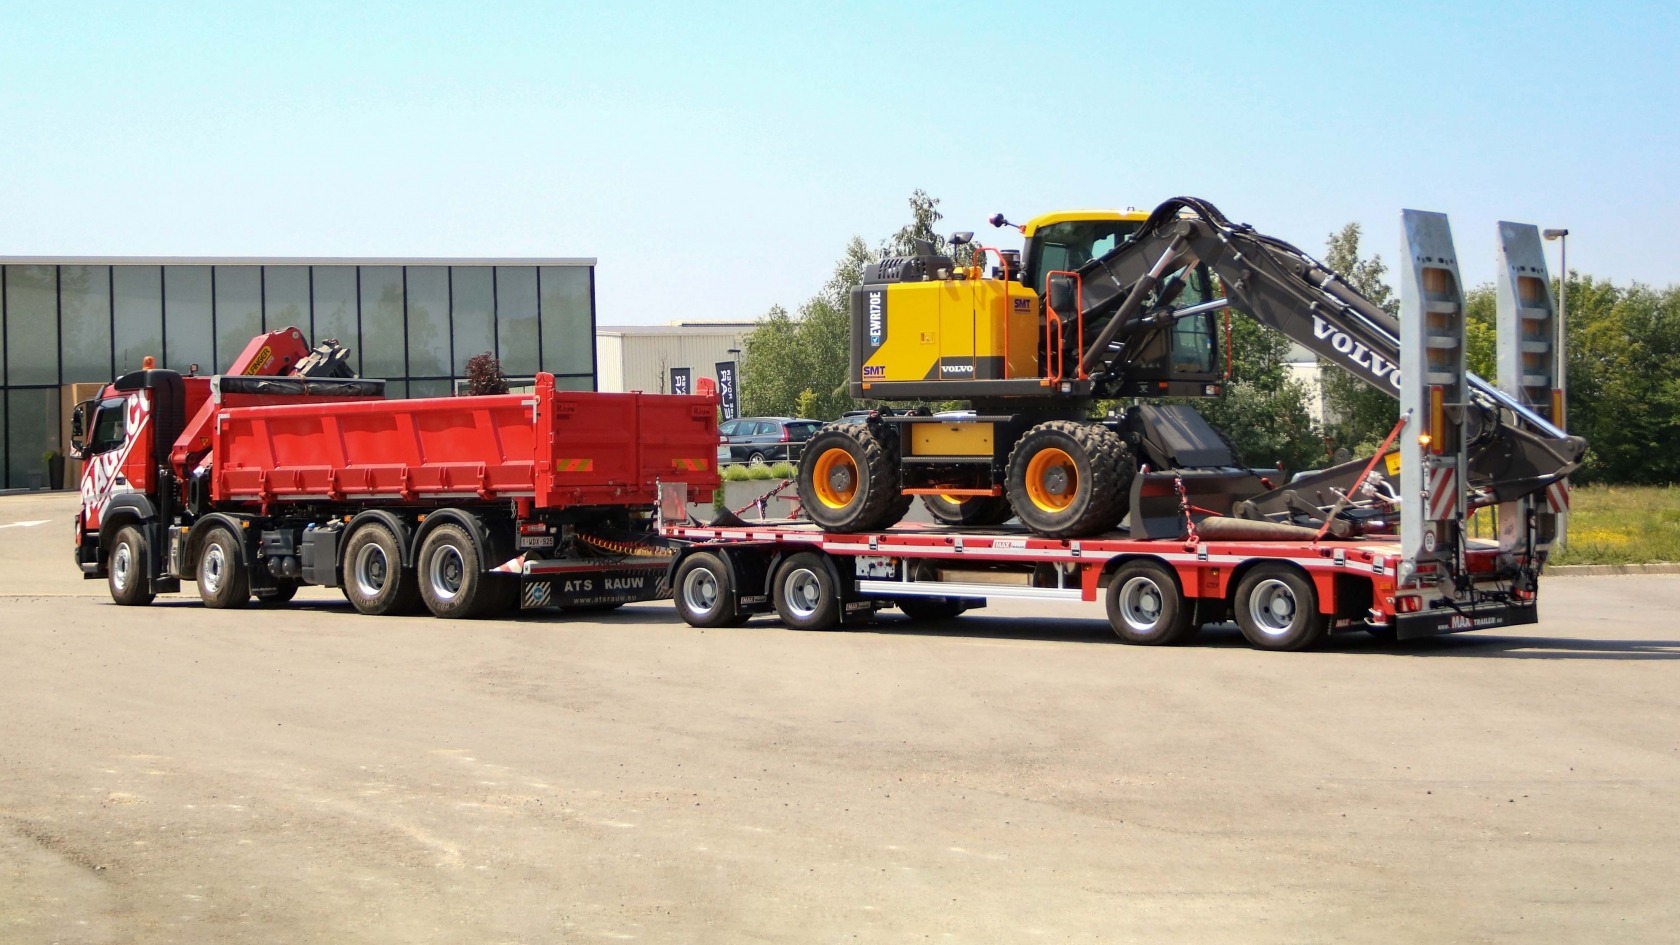 The MAX600 turntable trailer belongs on every construction site